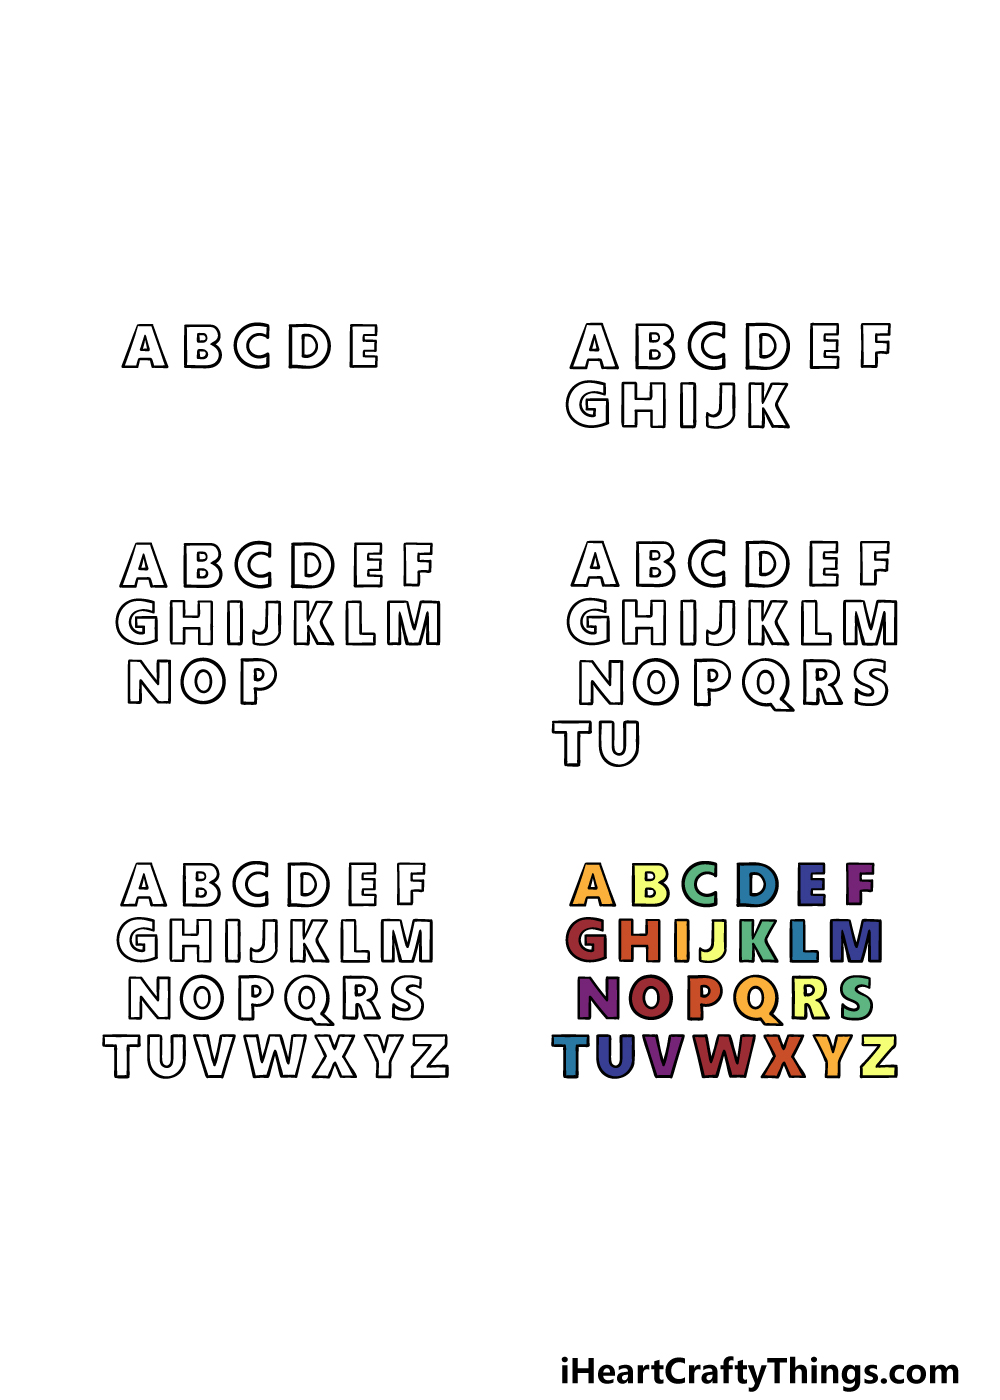 How to Draw The Alphabet in 6 steps